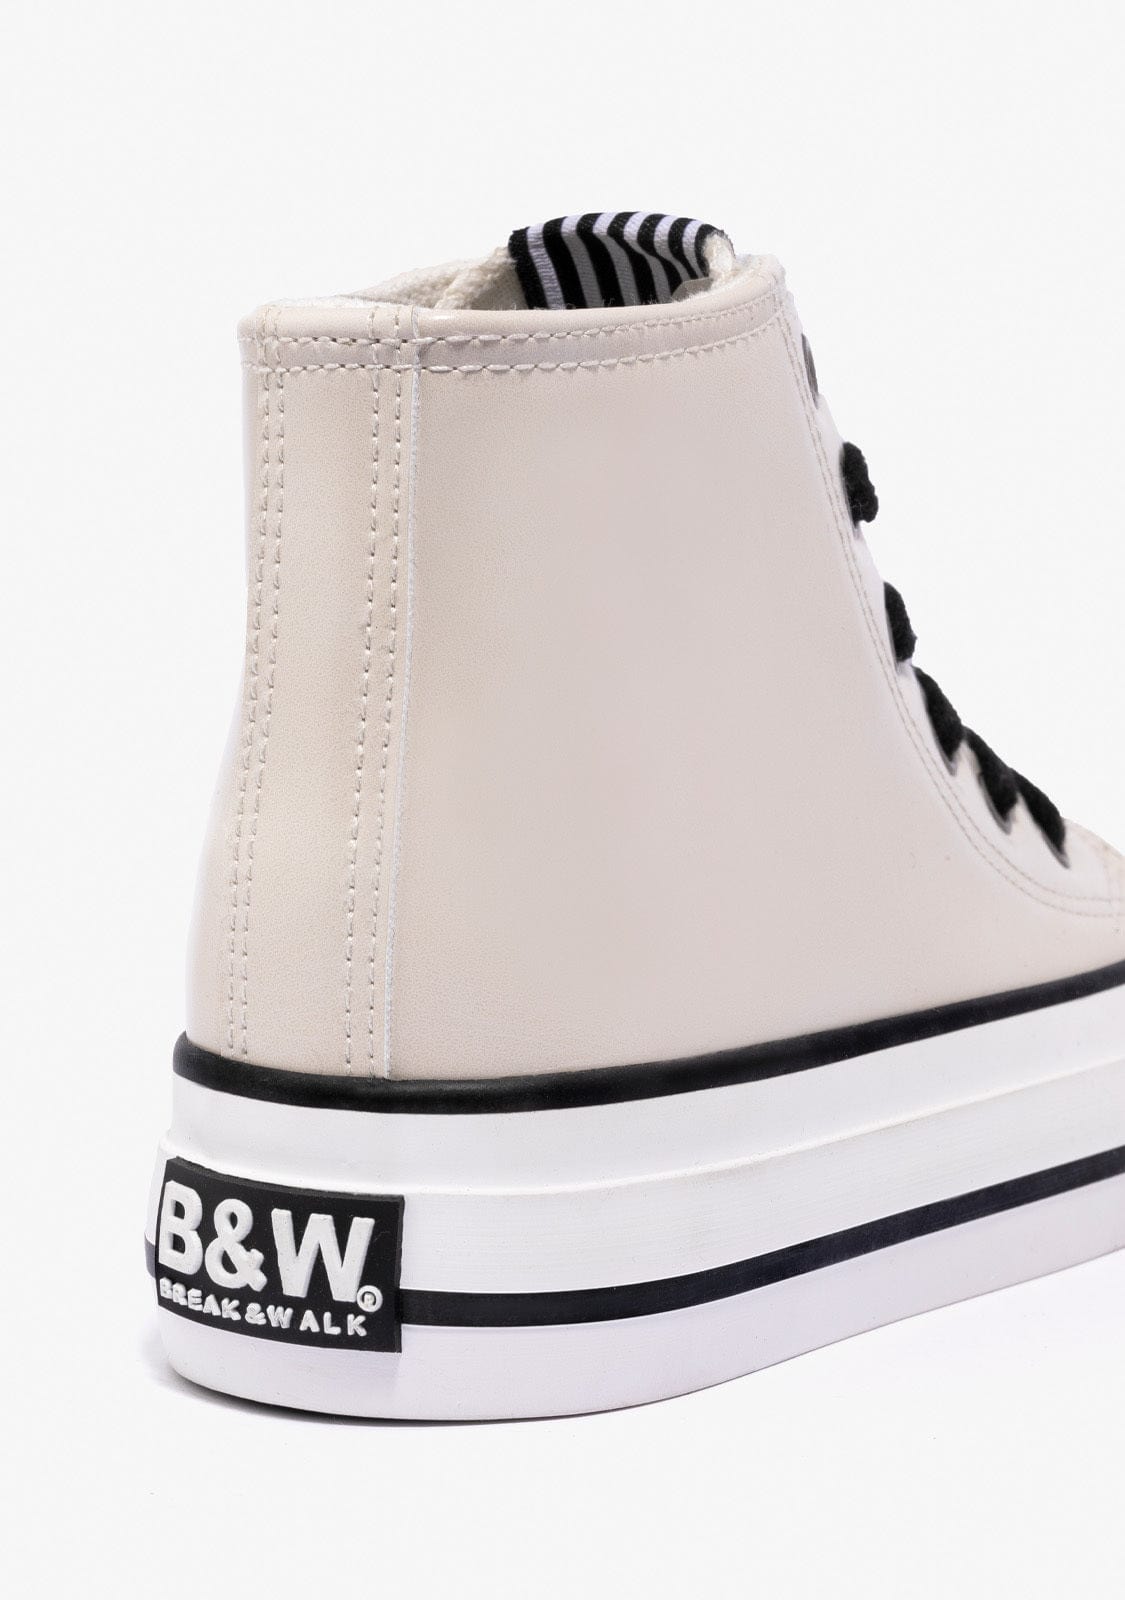 B&W JUNIOR Shoes B&W Off White Patent Platform High-Top Sneakers